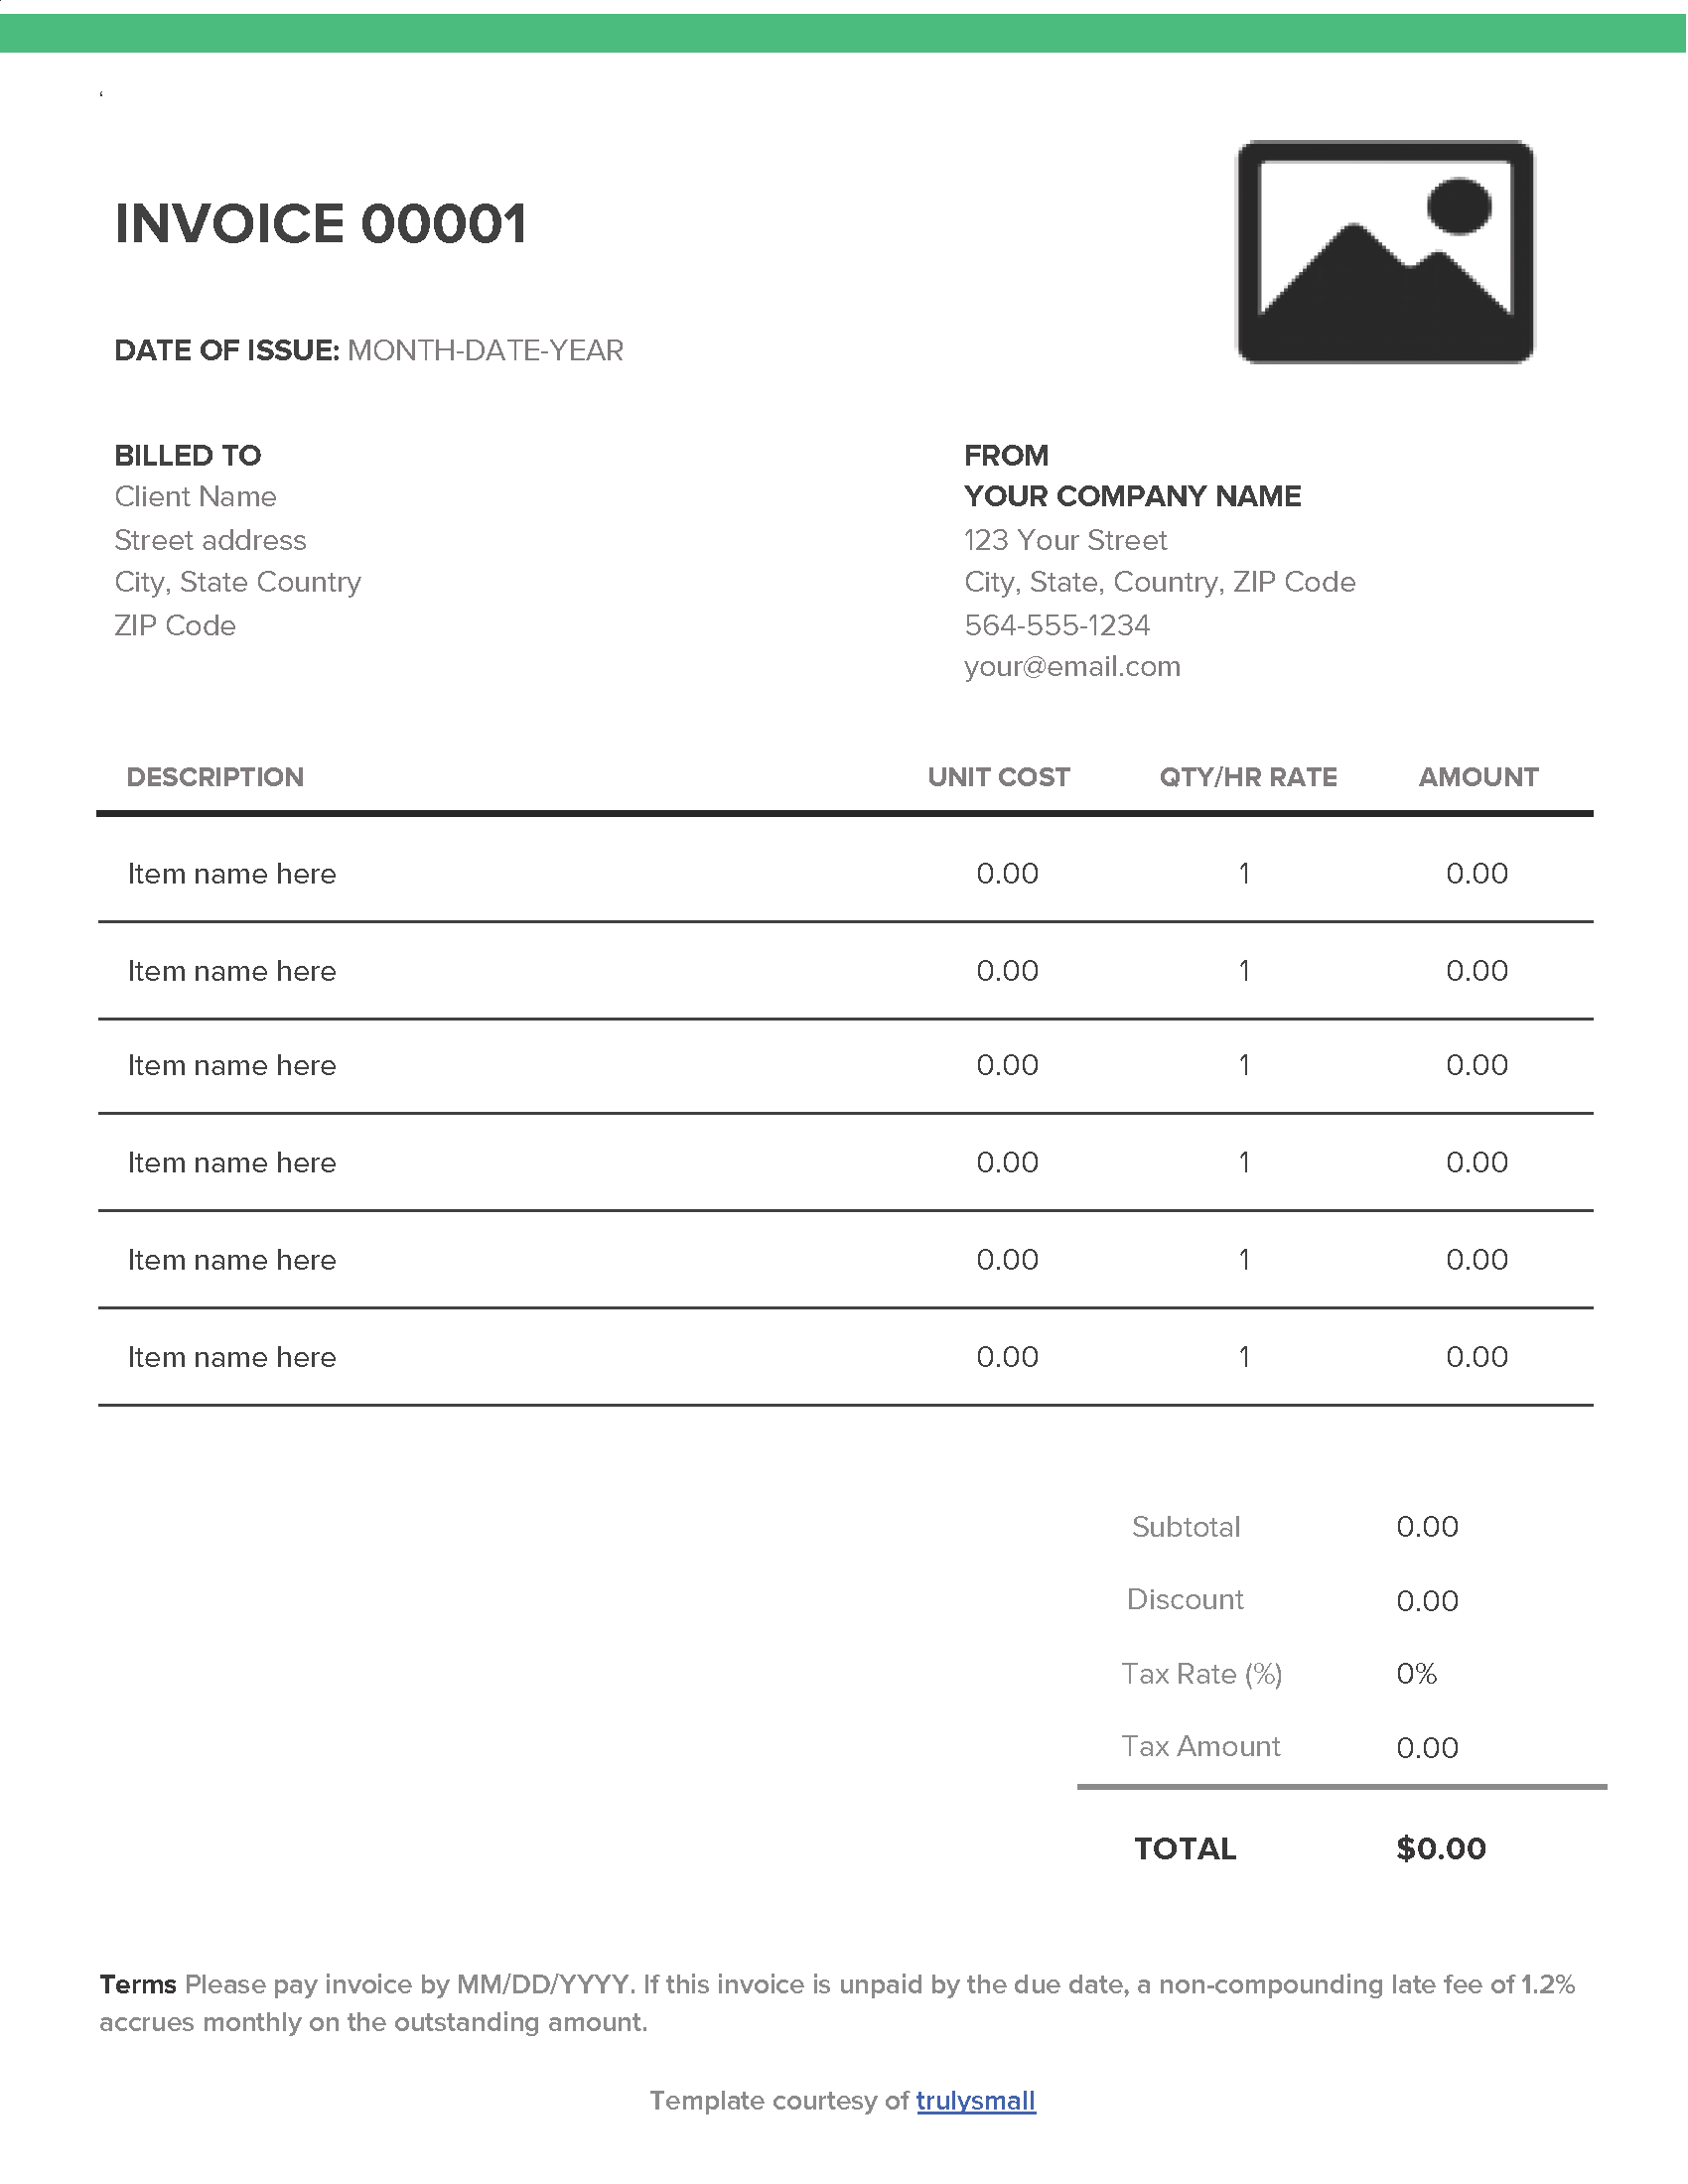 Free Business Invoice Templates Trulysmall